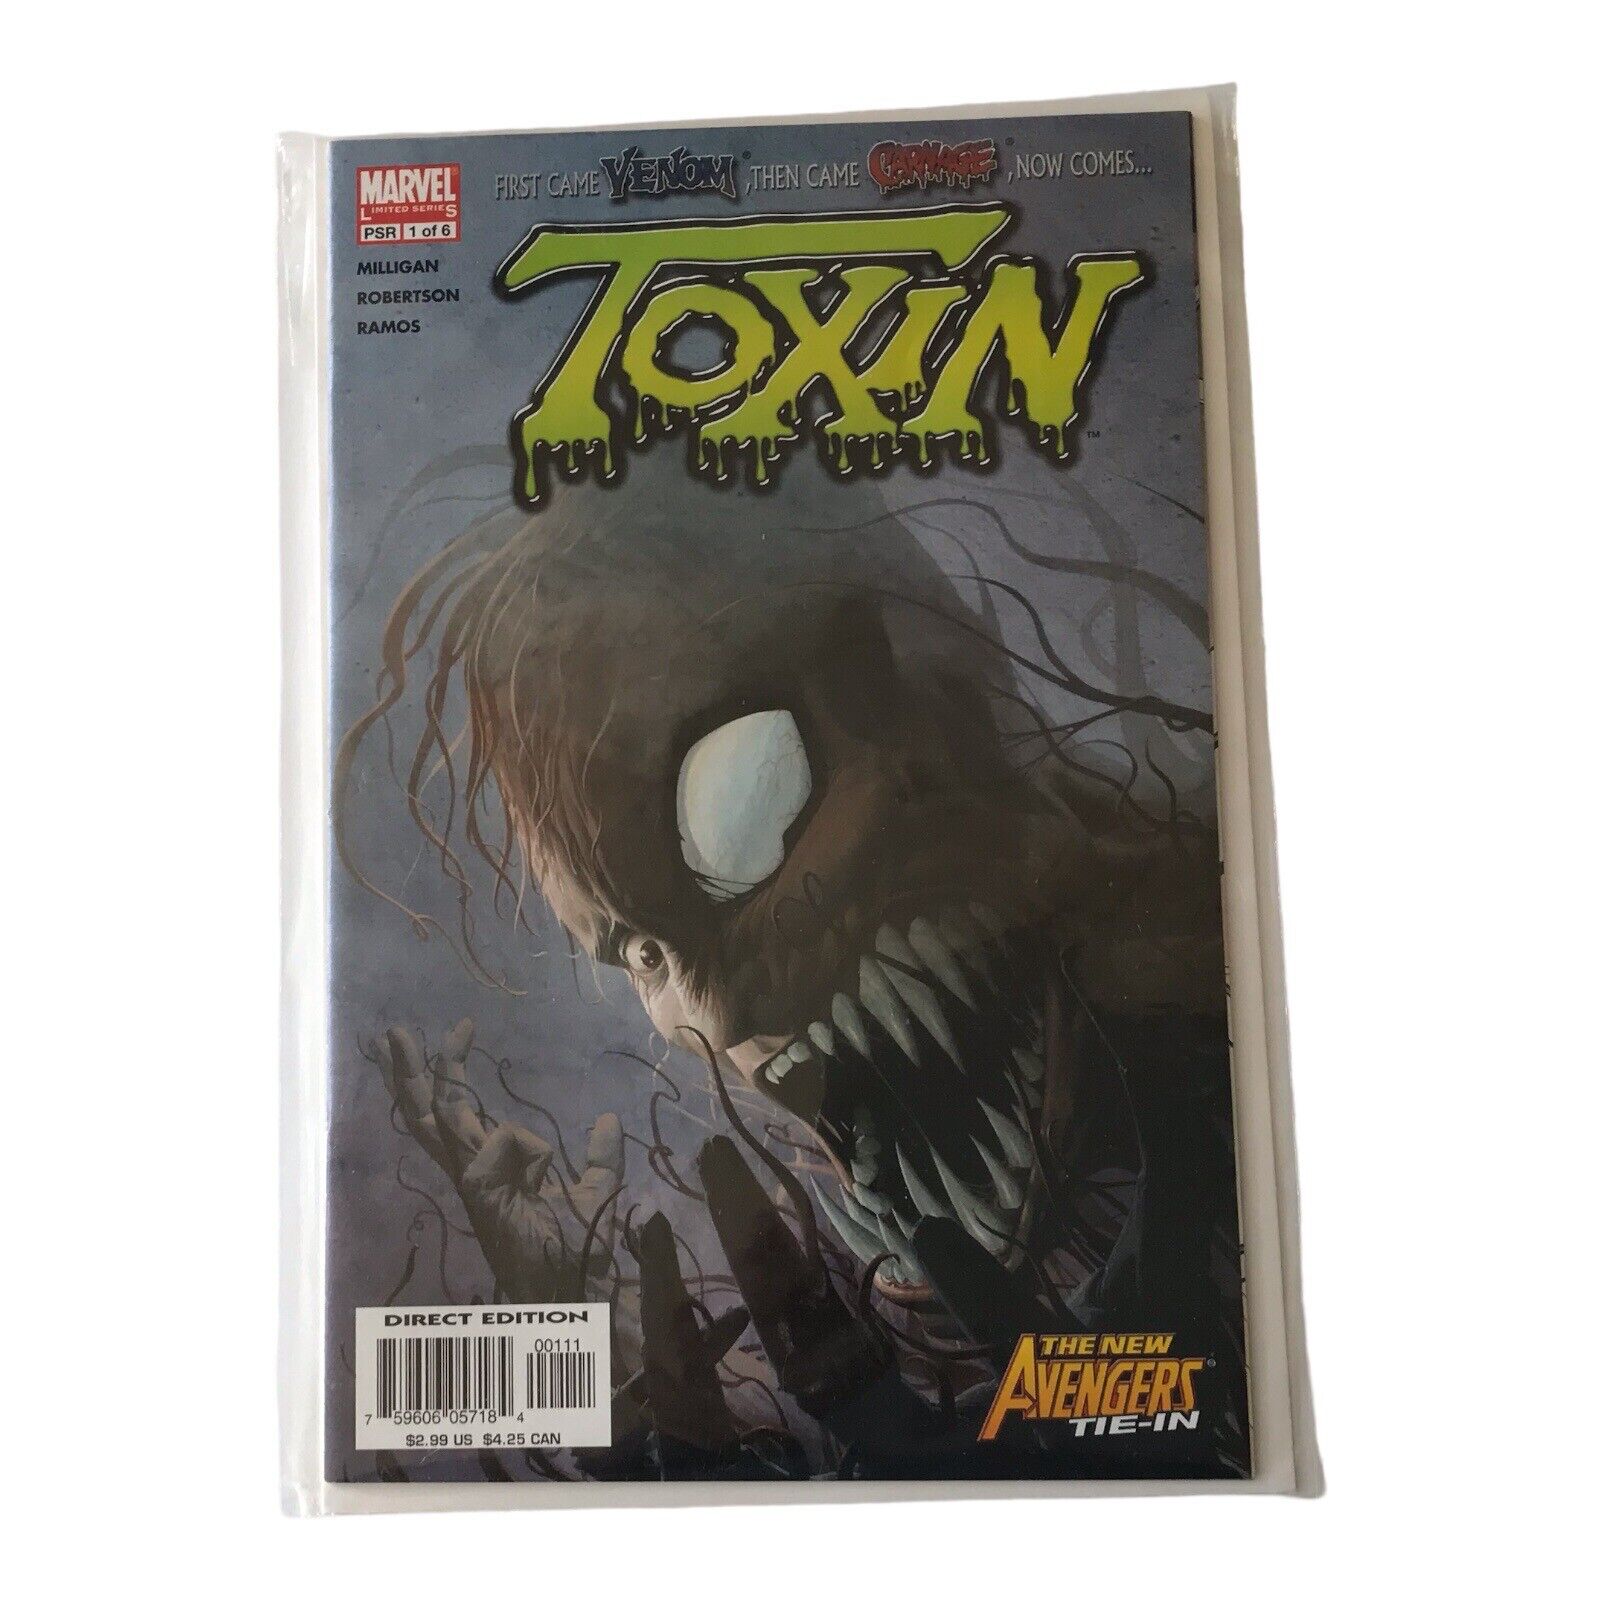 Marvel Comic Toxin #1 Spider-Man Appearance Marvel The New Advengers Tie-In 2005